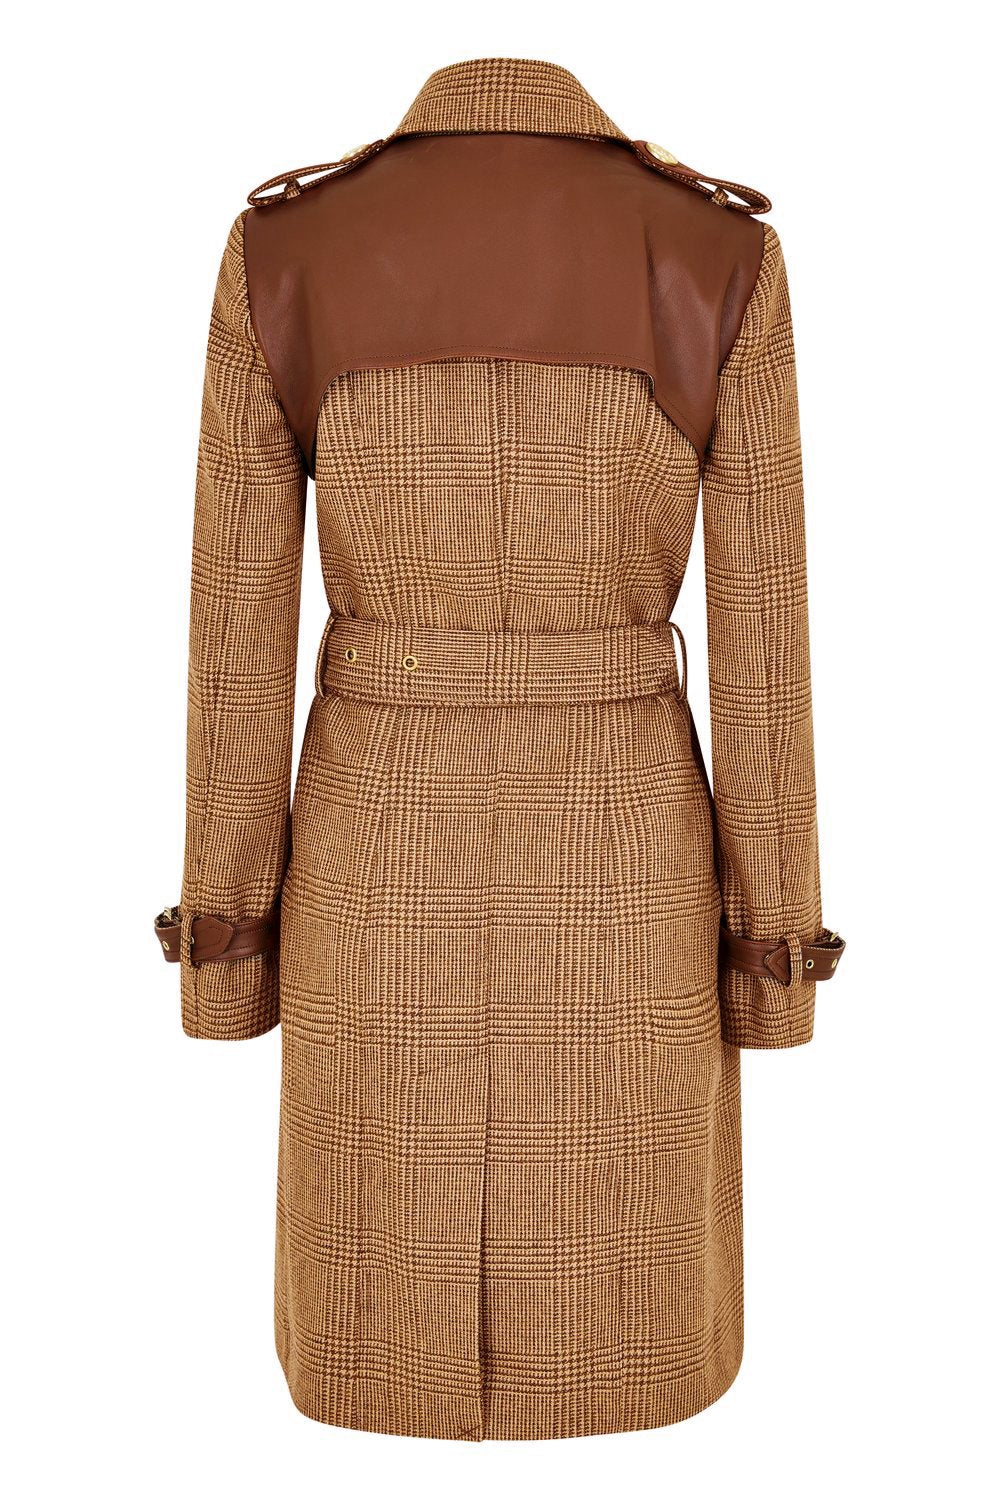 Back of womens tawny light tan detailed with gold hardware knee length wool trench coat